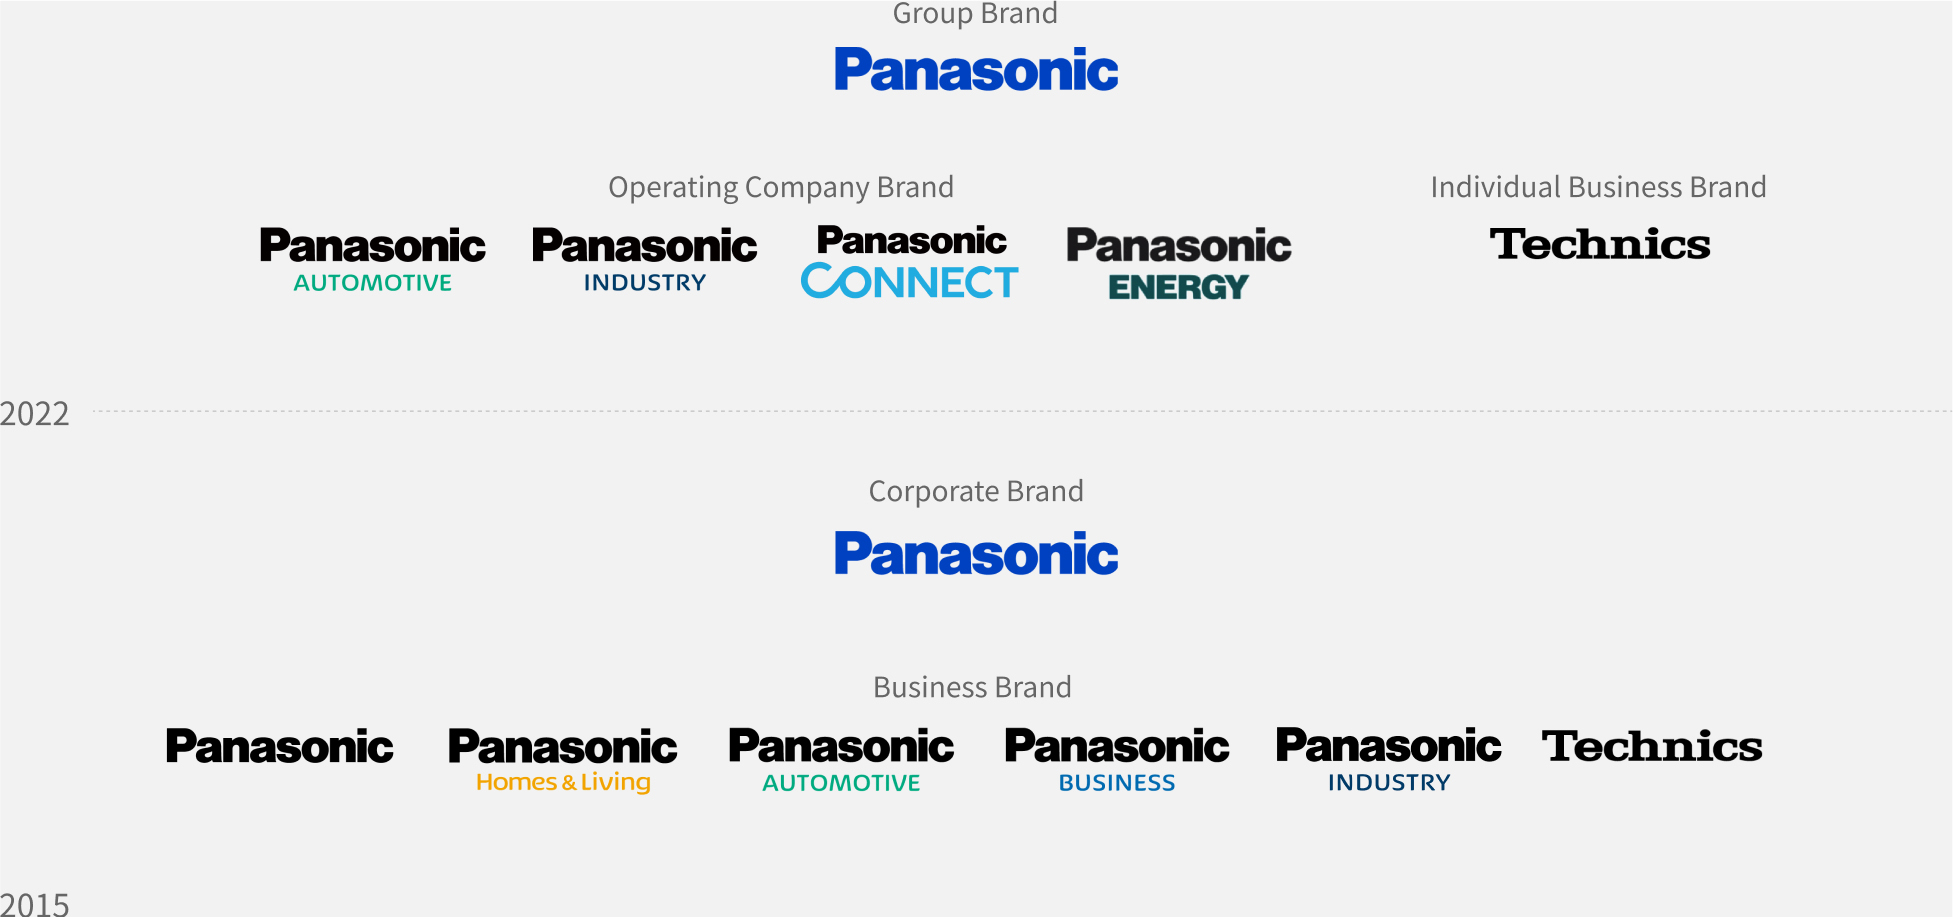 2022: As a part of our internal reorganization, we announced "Panasonic," will be our group brand, and "Panasonic AUTOMOTIVE," "Panasonic INDUSTRY", "Panasonic CONNECT,"  and "Panasonic ENERGY," as our new business brands, and also "Technics" as our subsidiary brand. 2015: We announced that we set the corporate brand as "Panasonic," and the business brand as "Panasonic AUTOMOTIVE," "Panasonic BUSINESS," ":Panasonic Homes & Living," "Panasonic INDUSTRY," and "Technics".